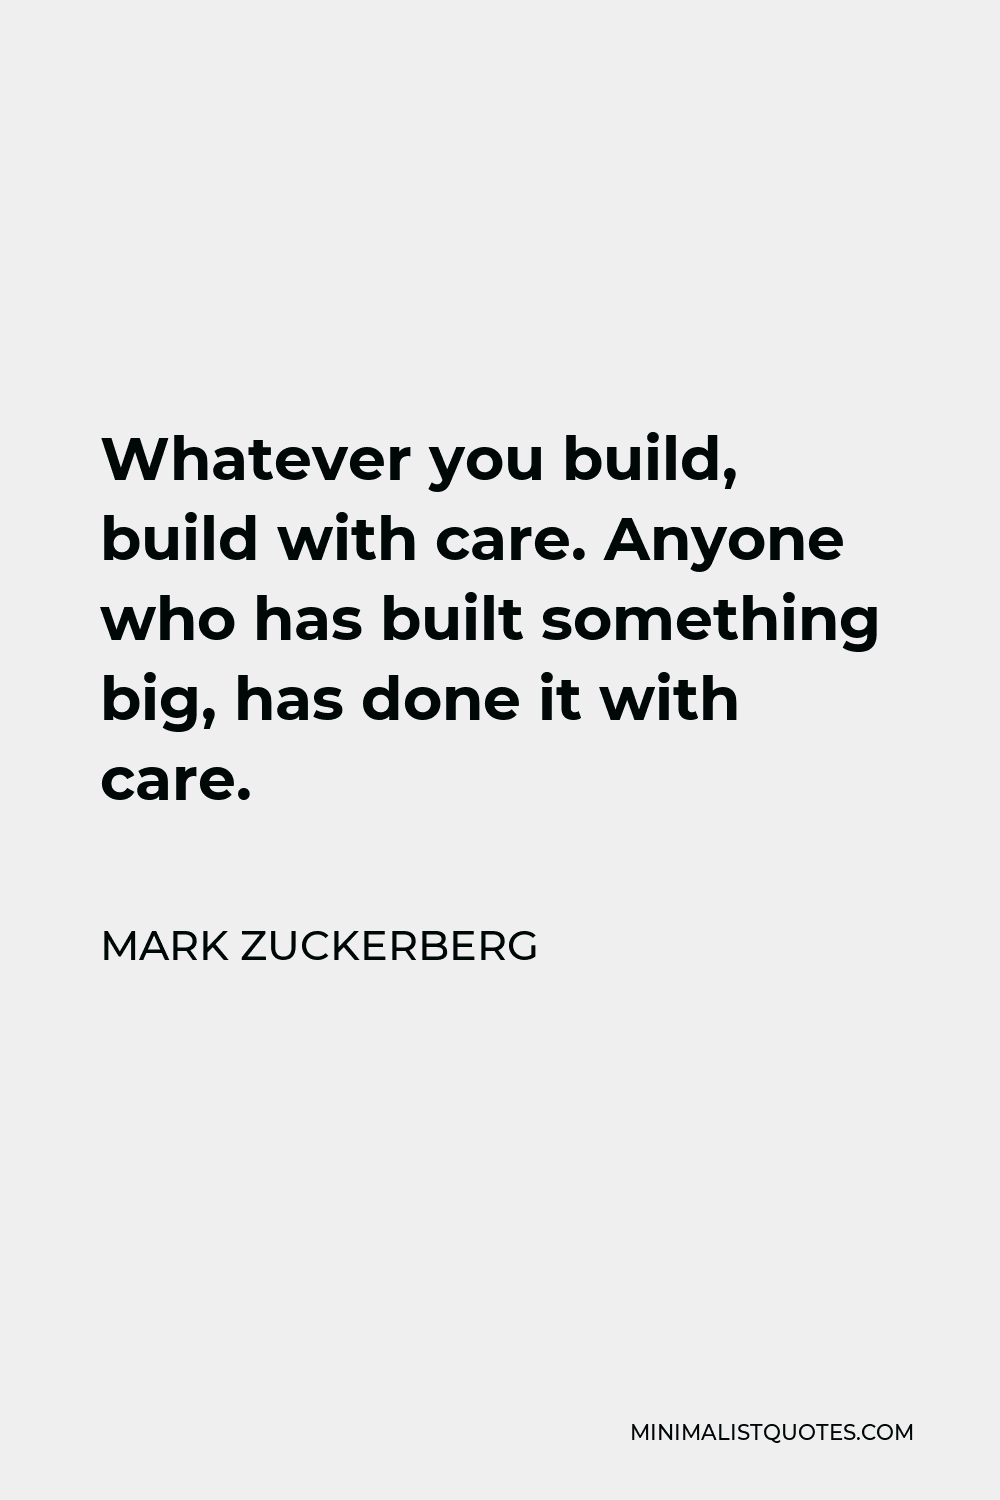 Mark Zuckerberg Quote - Whatever you build, build with care. Anyone who has built something big, has done it with care.